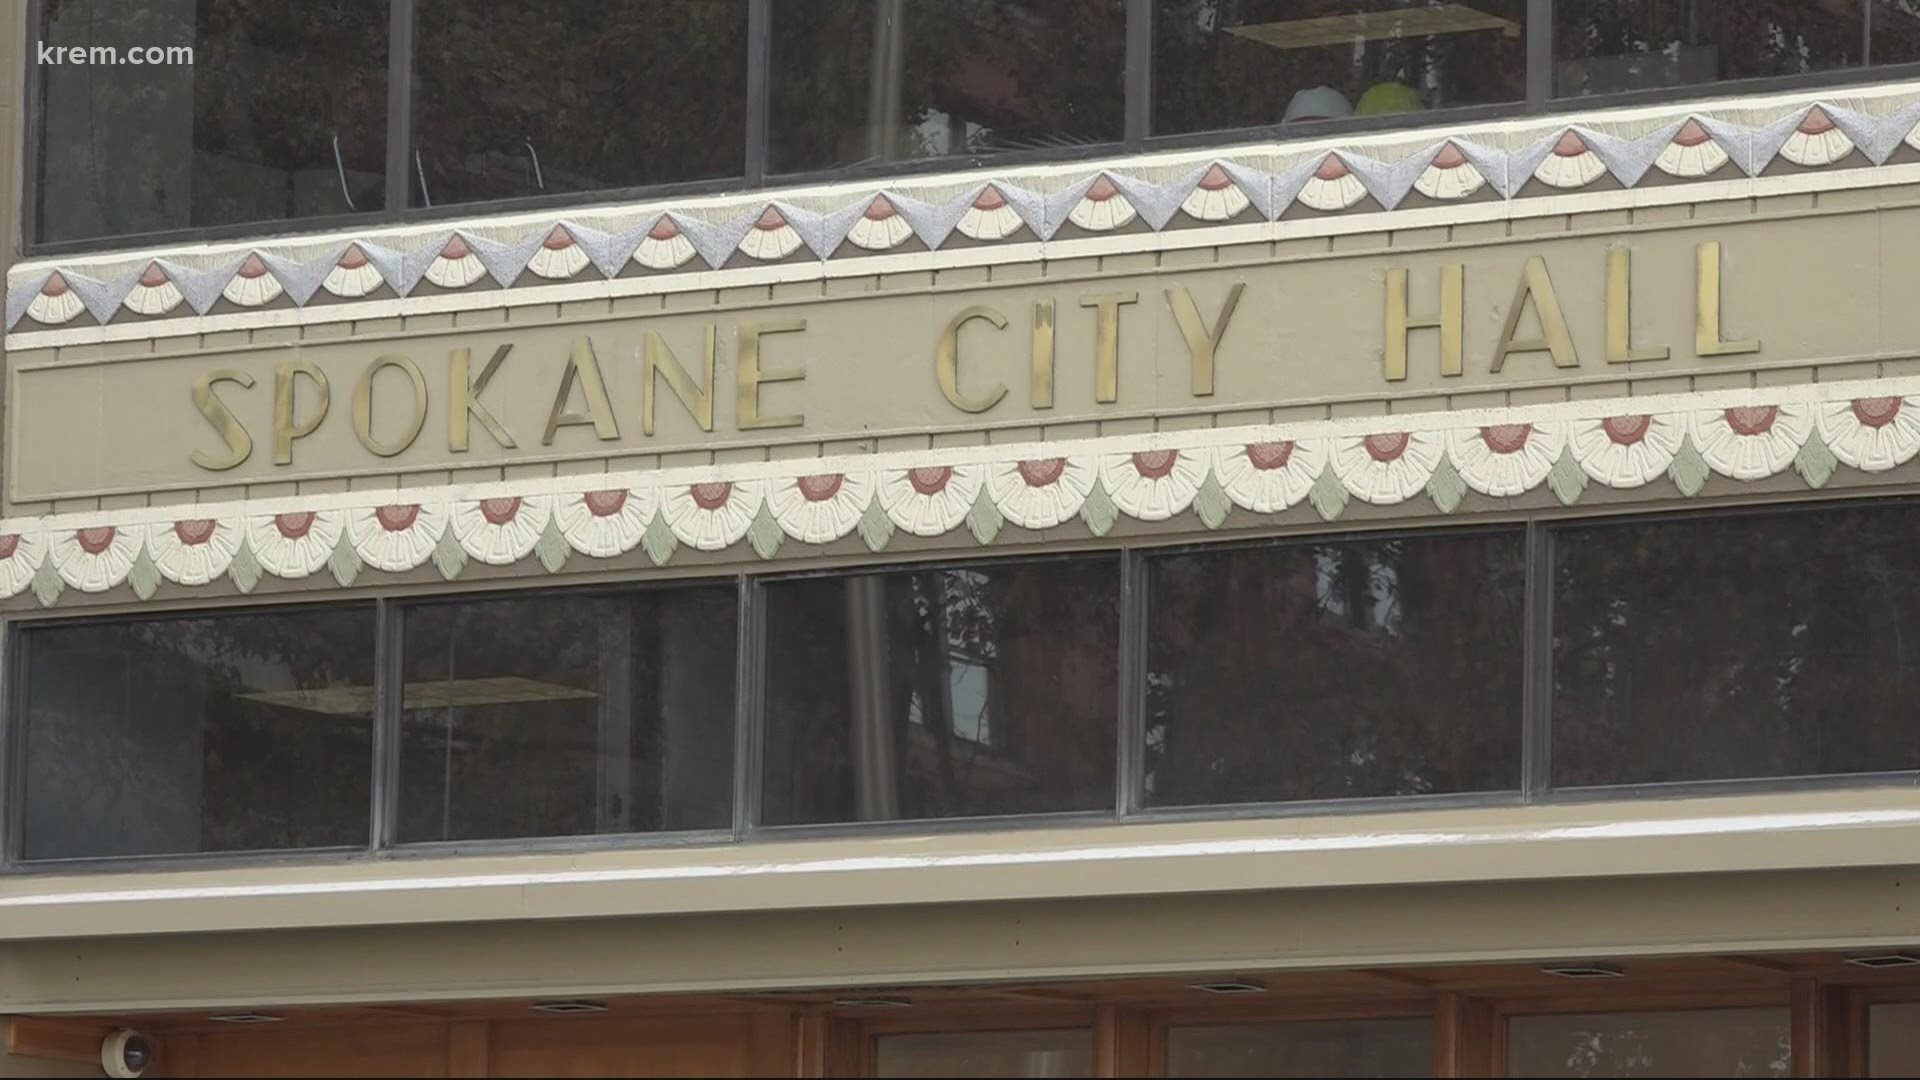 The state auditor's report identified potential conflicts of interest in two contracts for Spokane warming centers. They involve Ben Stuckart and Kelly Keenan.